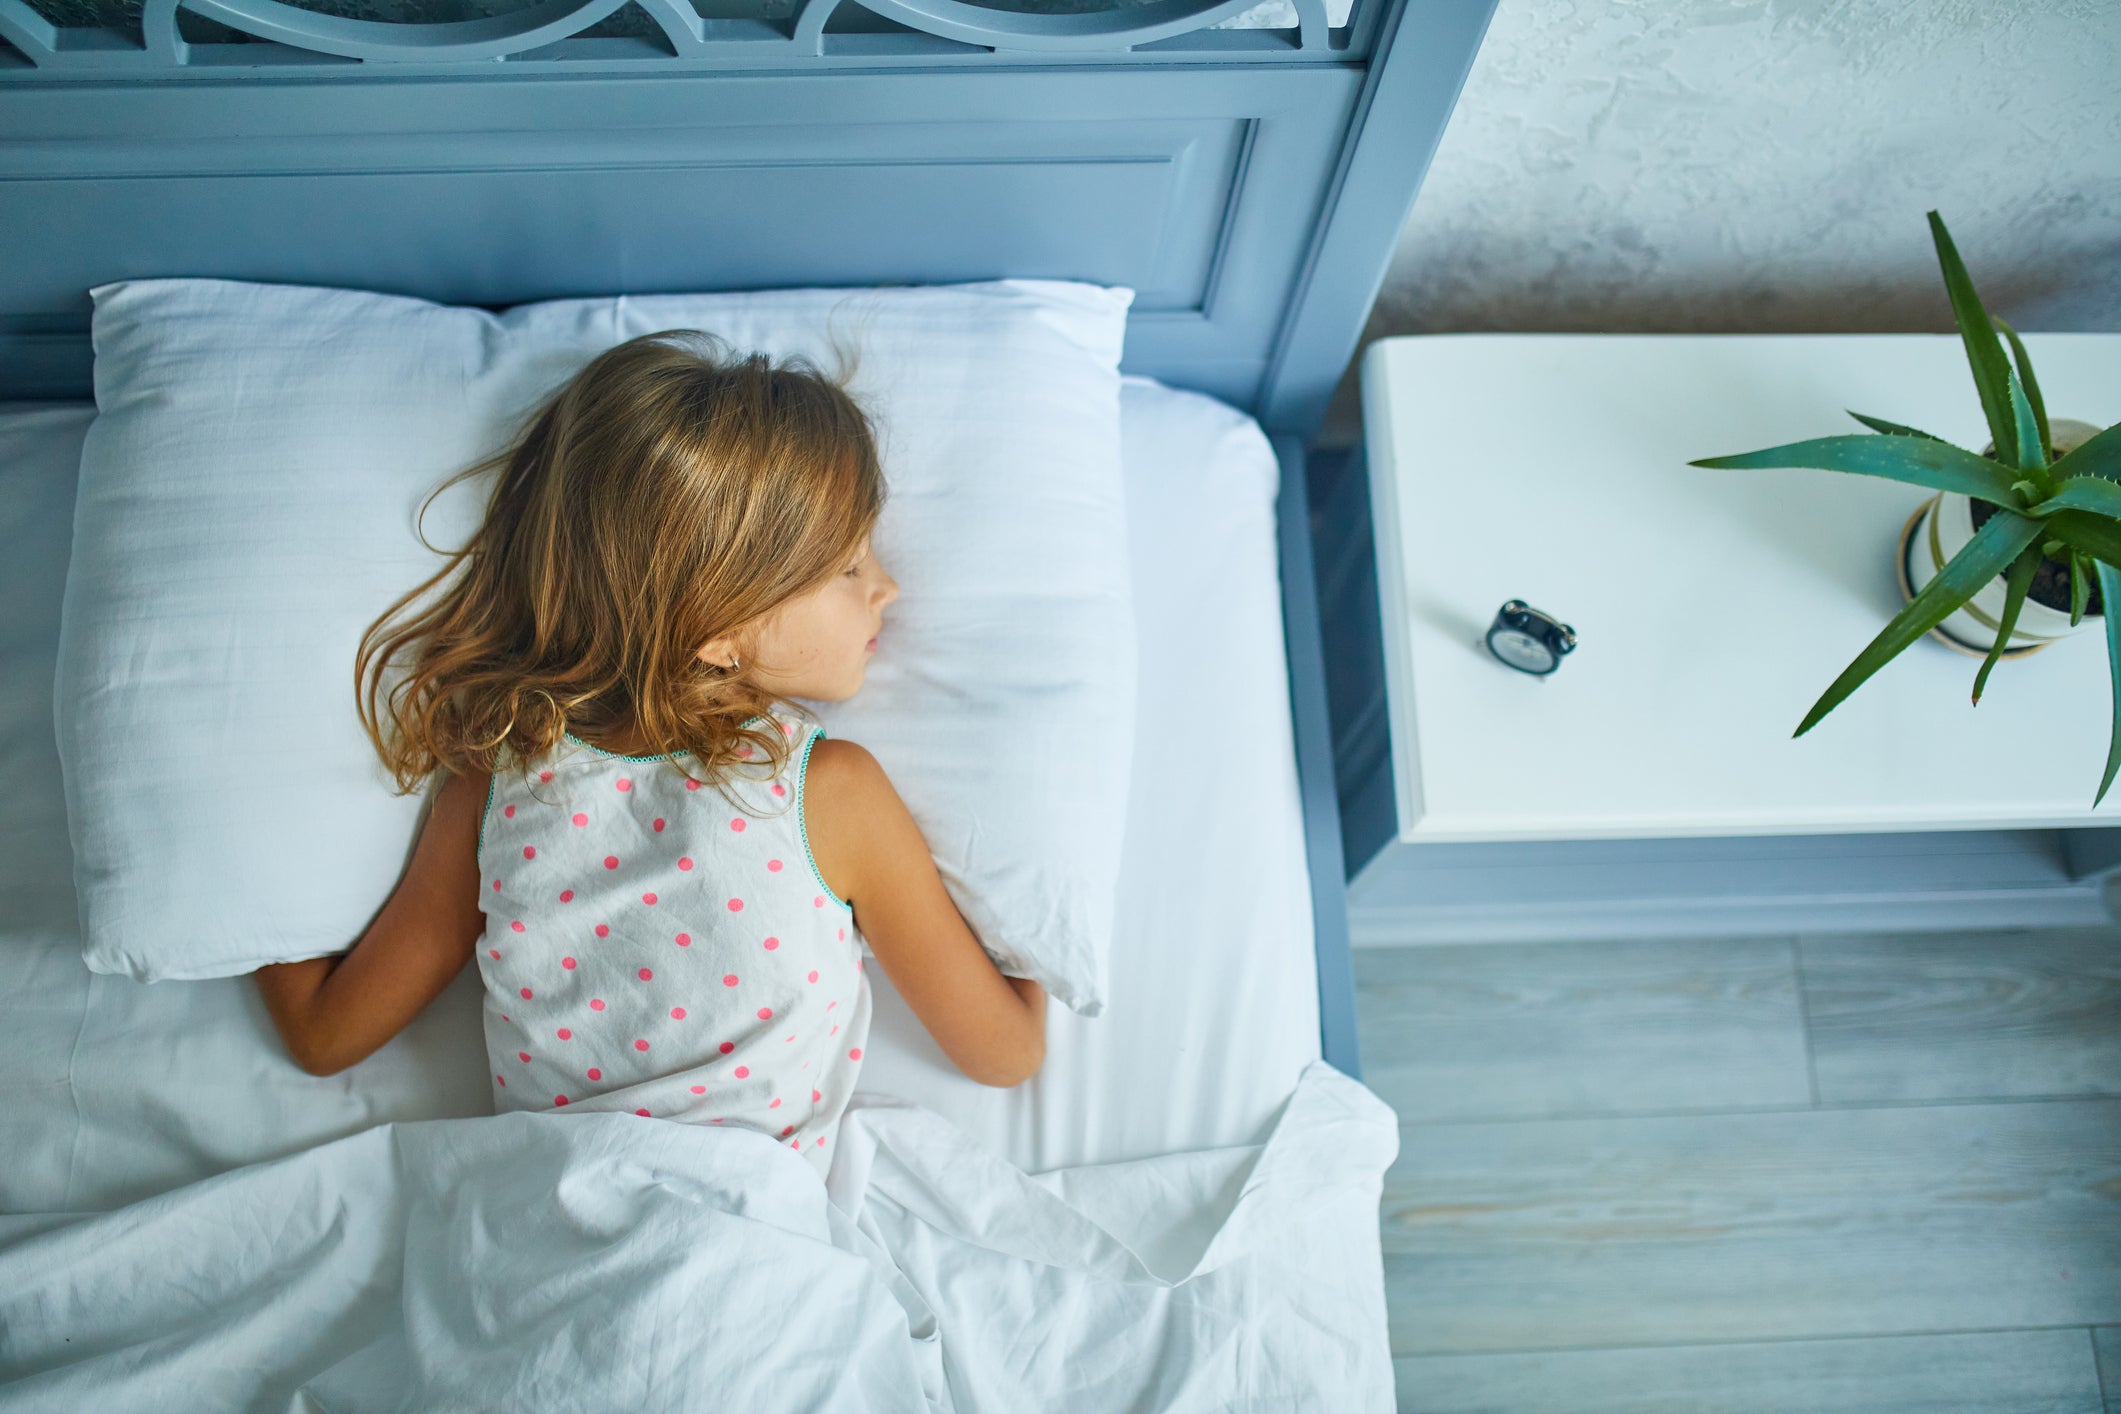 Sleep problems are not just confined to children